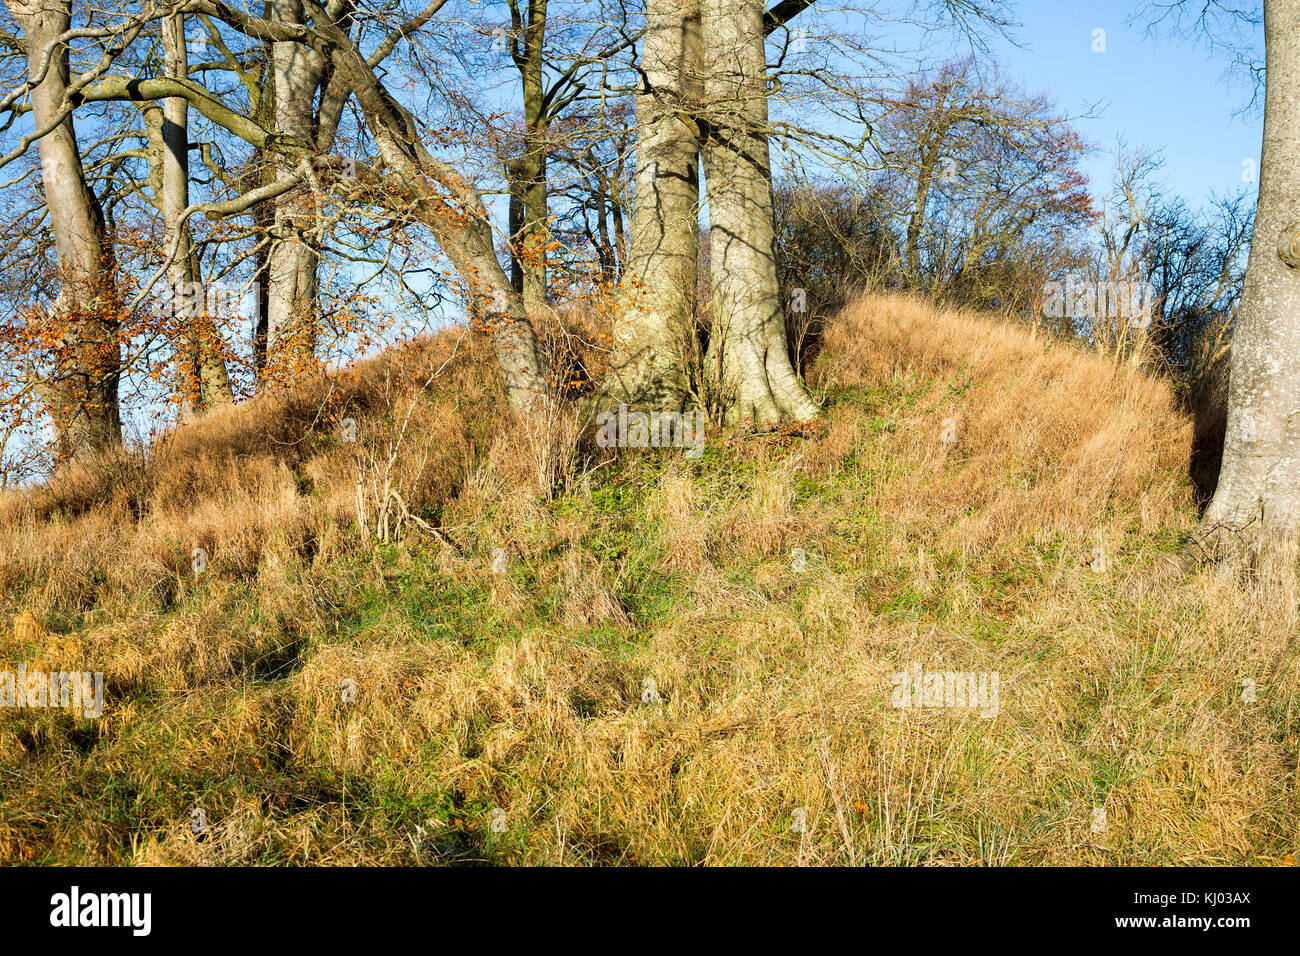 Neolithic long barrow in chalk downland countryside near East Kennet, Wiltshire, England, UK Stock Photo